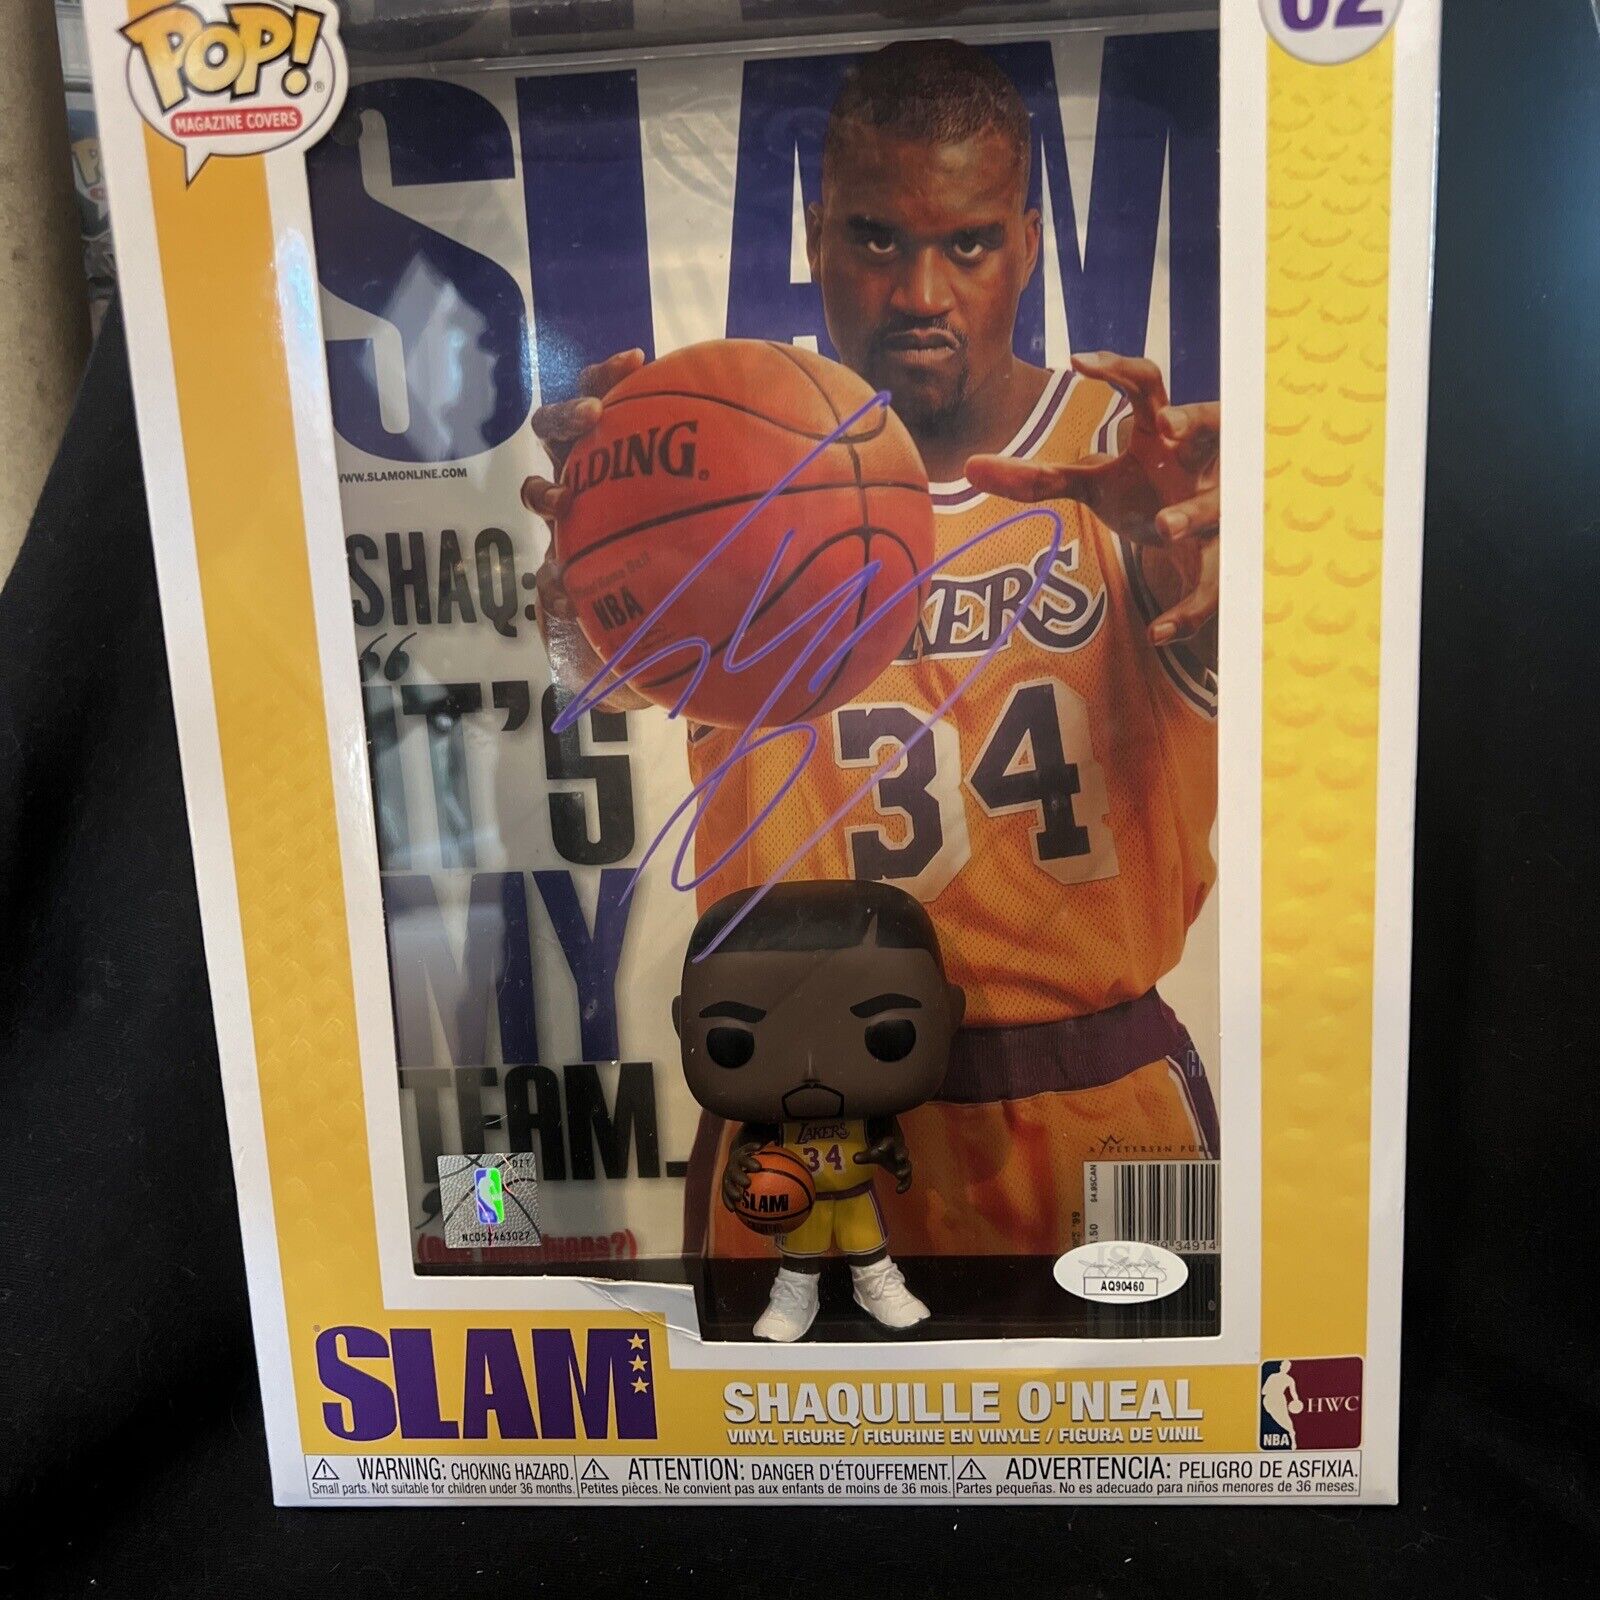 SHAQUILLE O'NEAL Signed Autograph Funko POP Magazine Covers JSA Authenticity